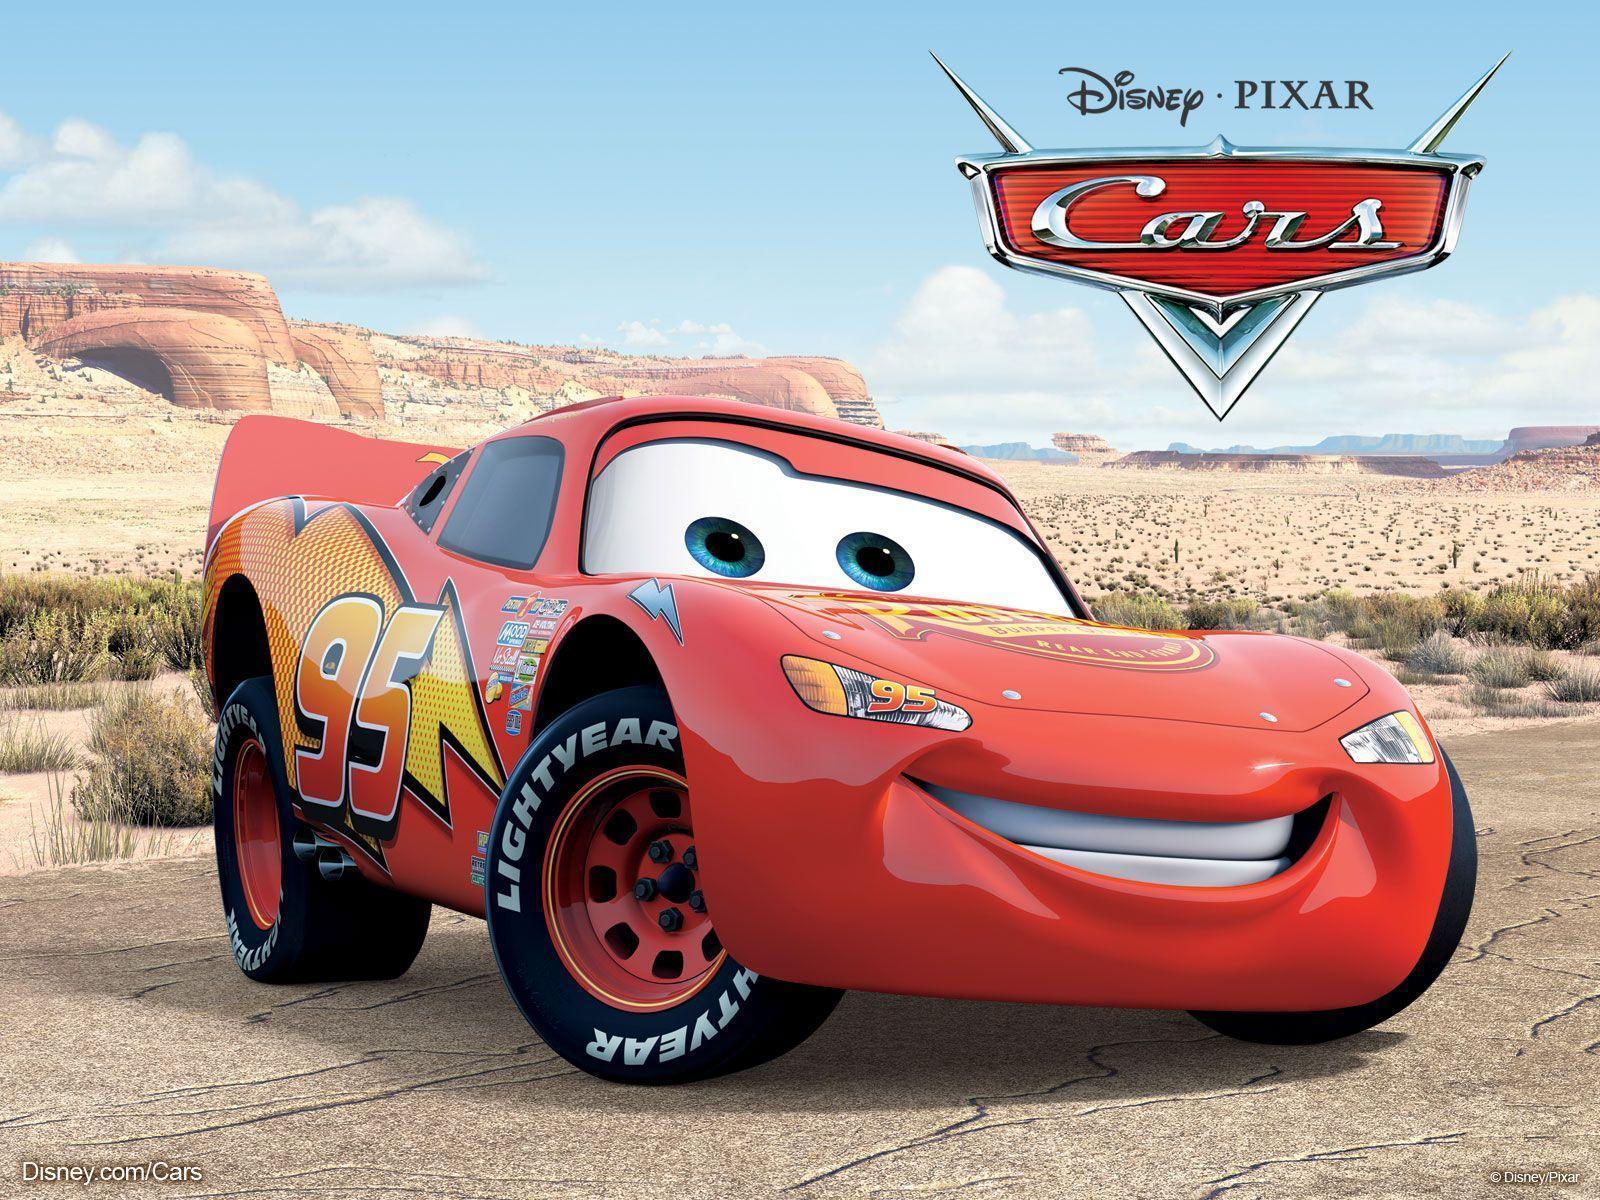 Movie Review: Cars 3. Bonnie hunt, Owen wilson and Nathan fillion